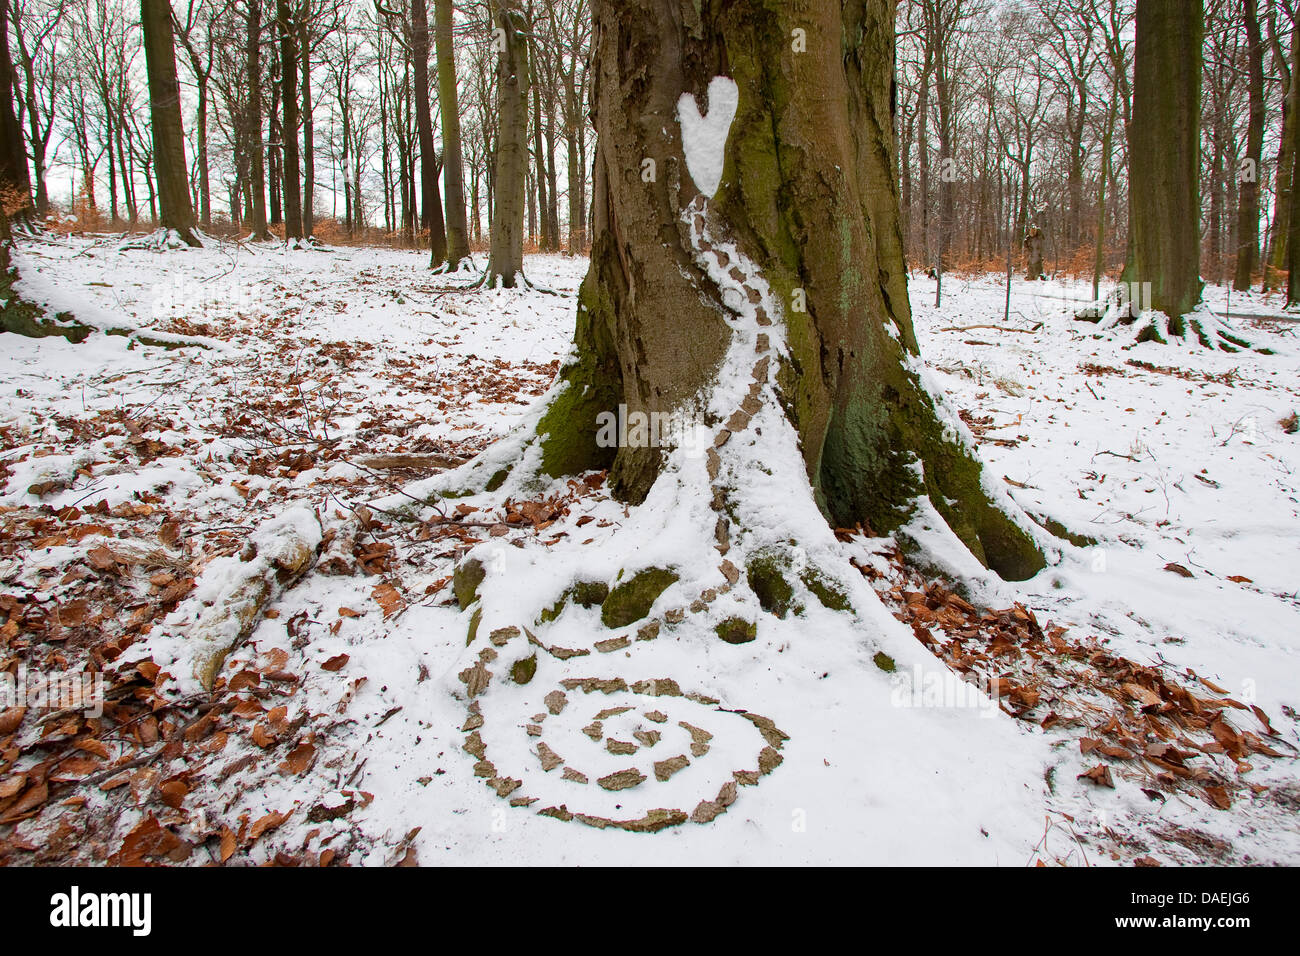 spiral made of bark pieces aa nature art in winter, Germany Stock Photo